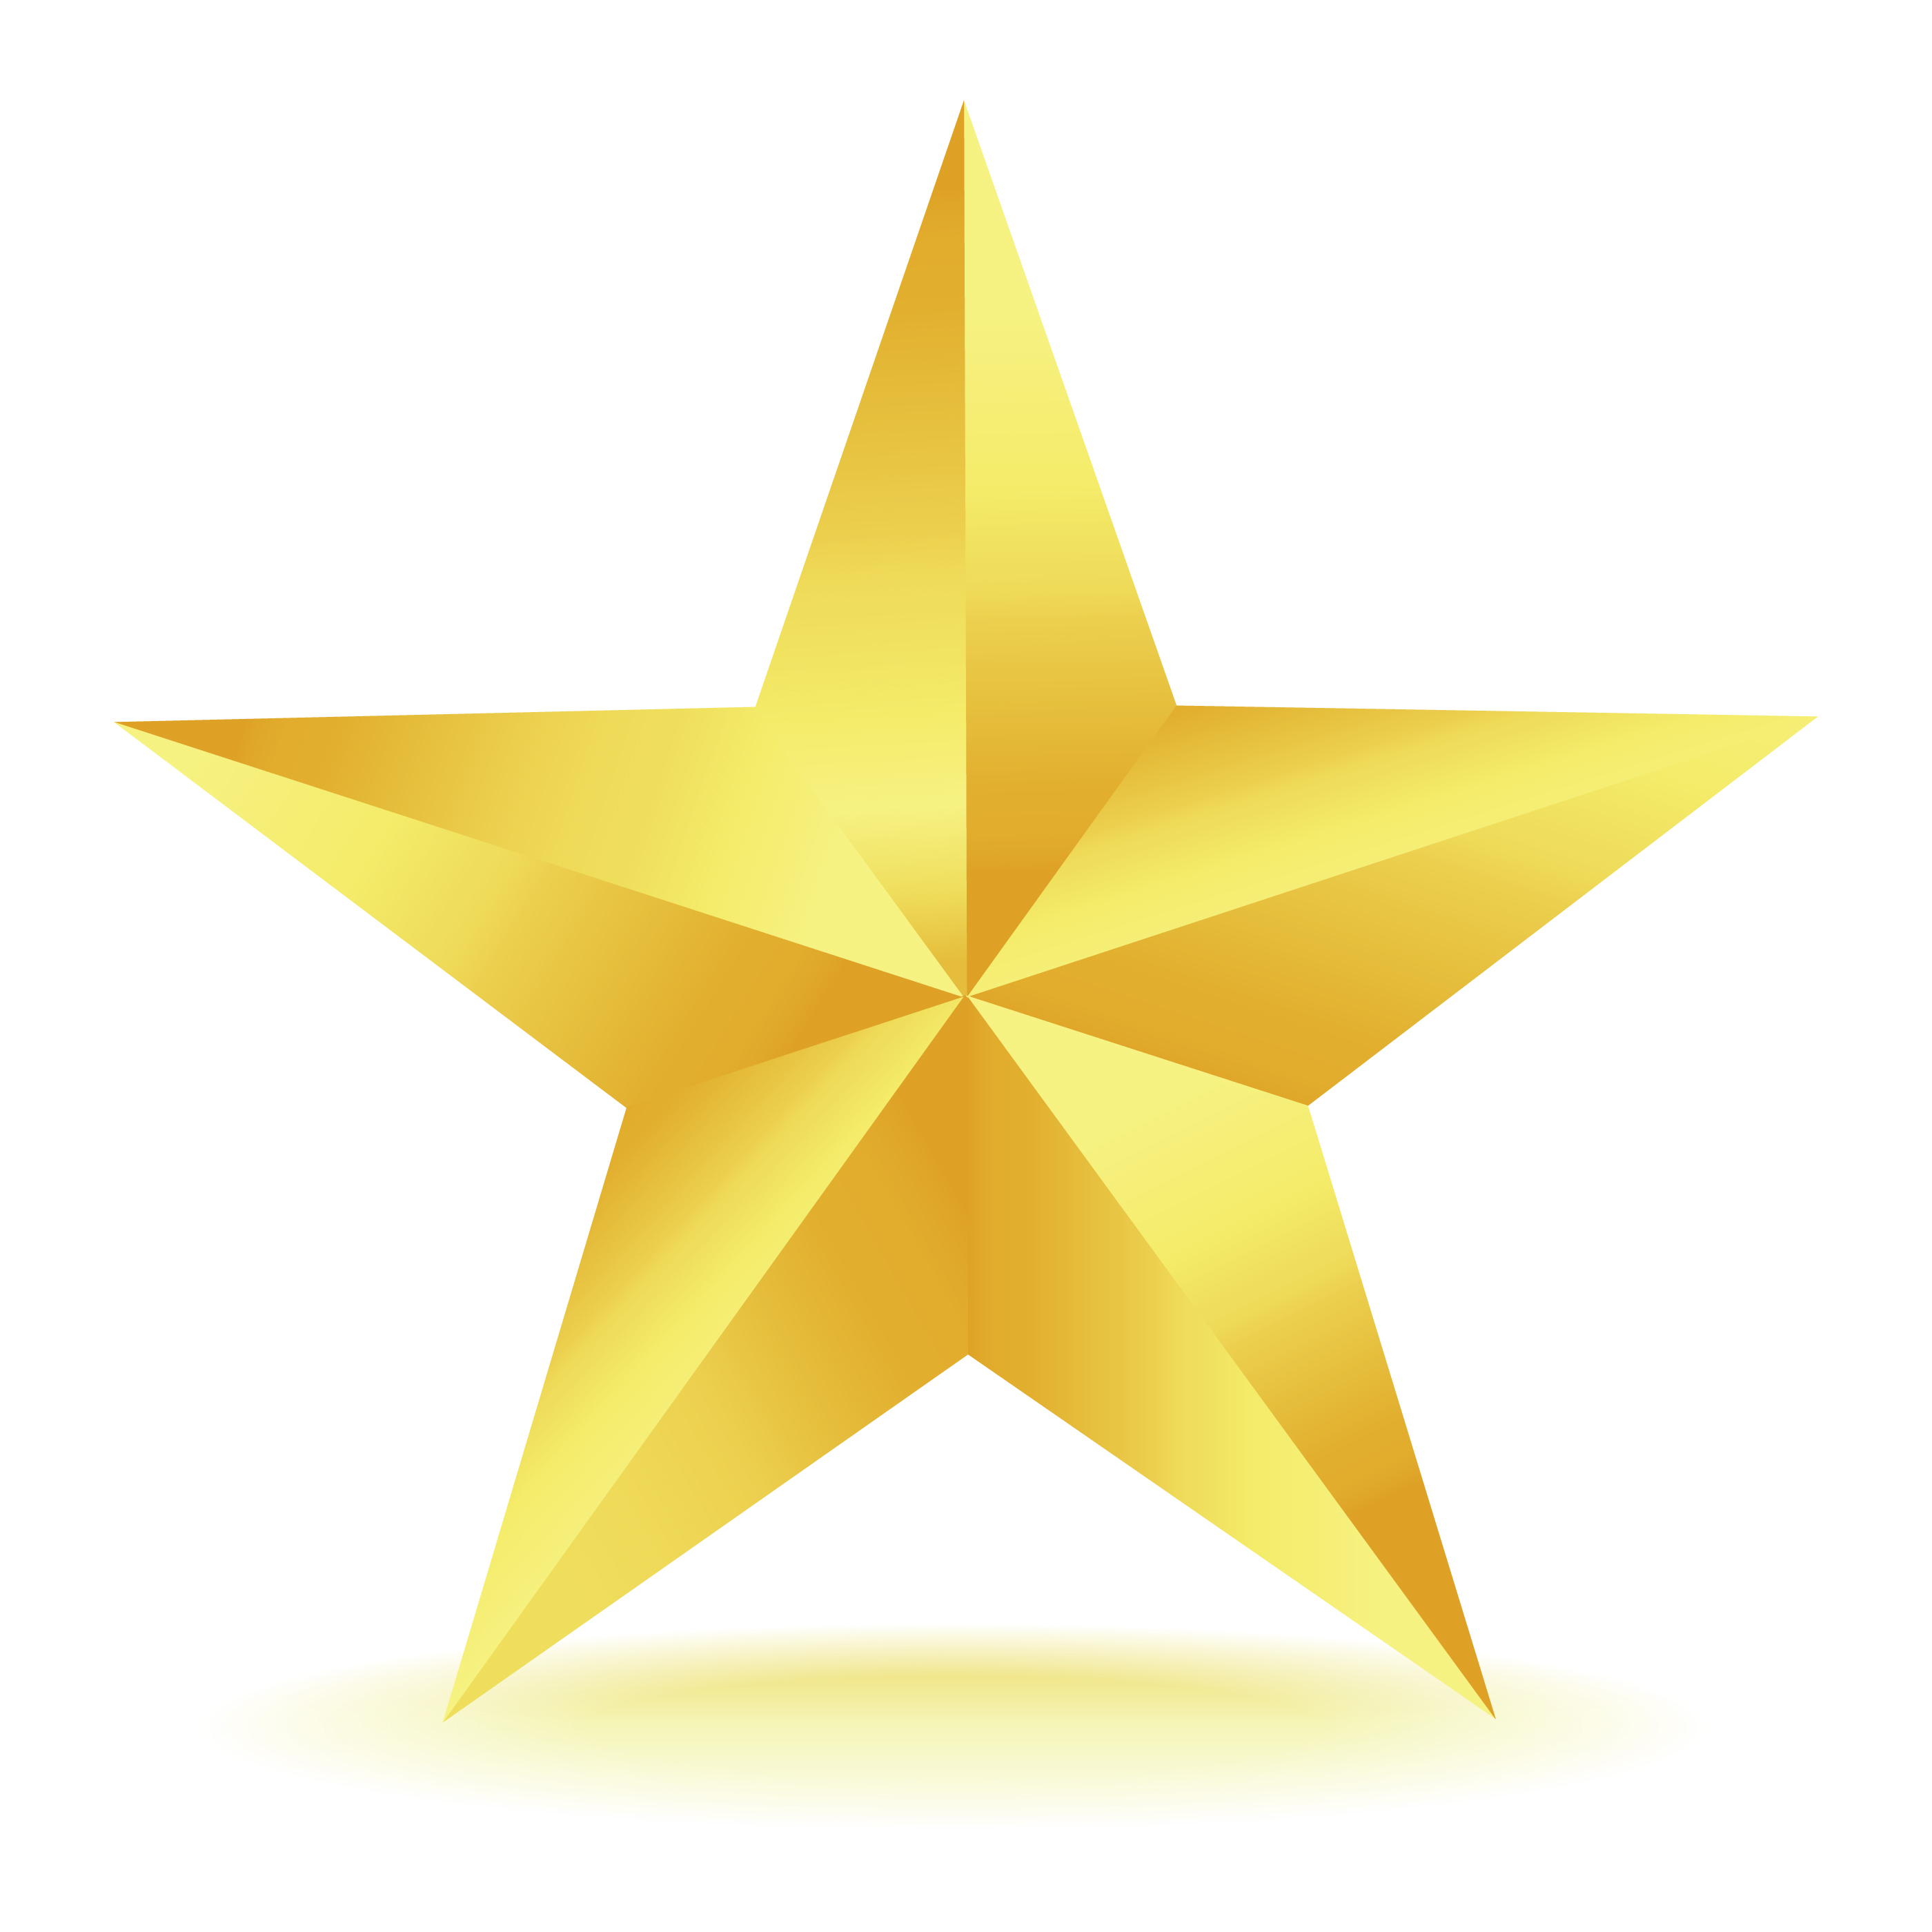 Gold Star Free Clipart #1 - Star Images Free Clip Art